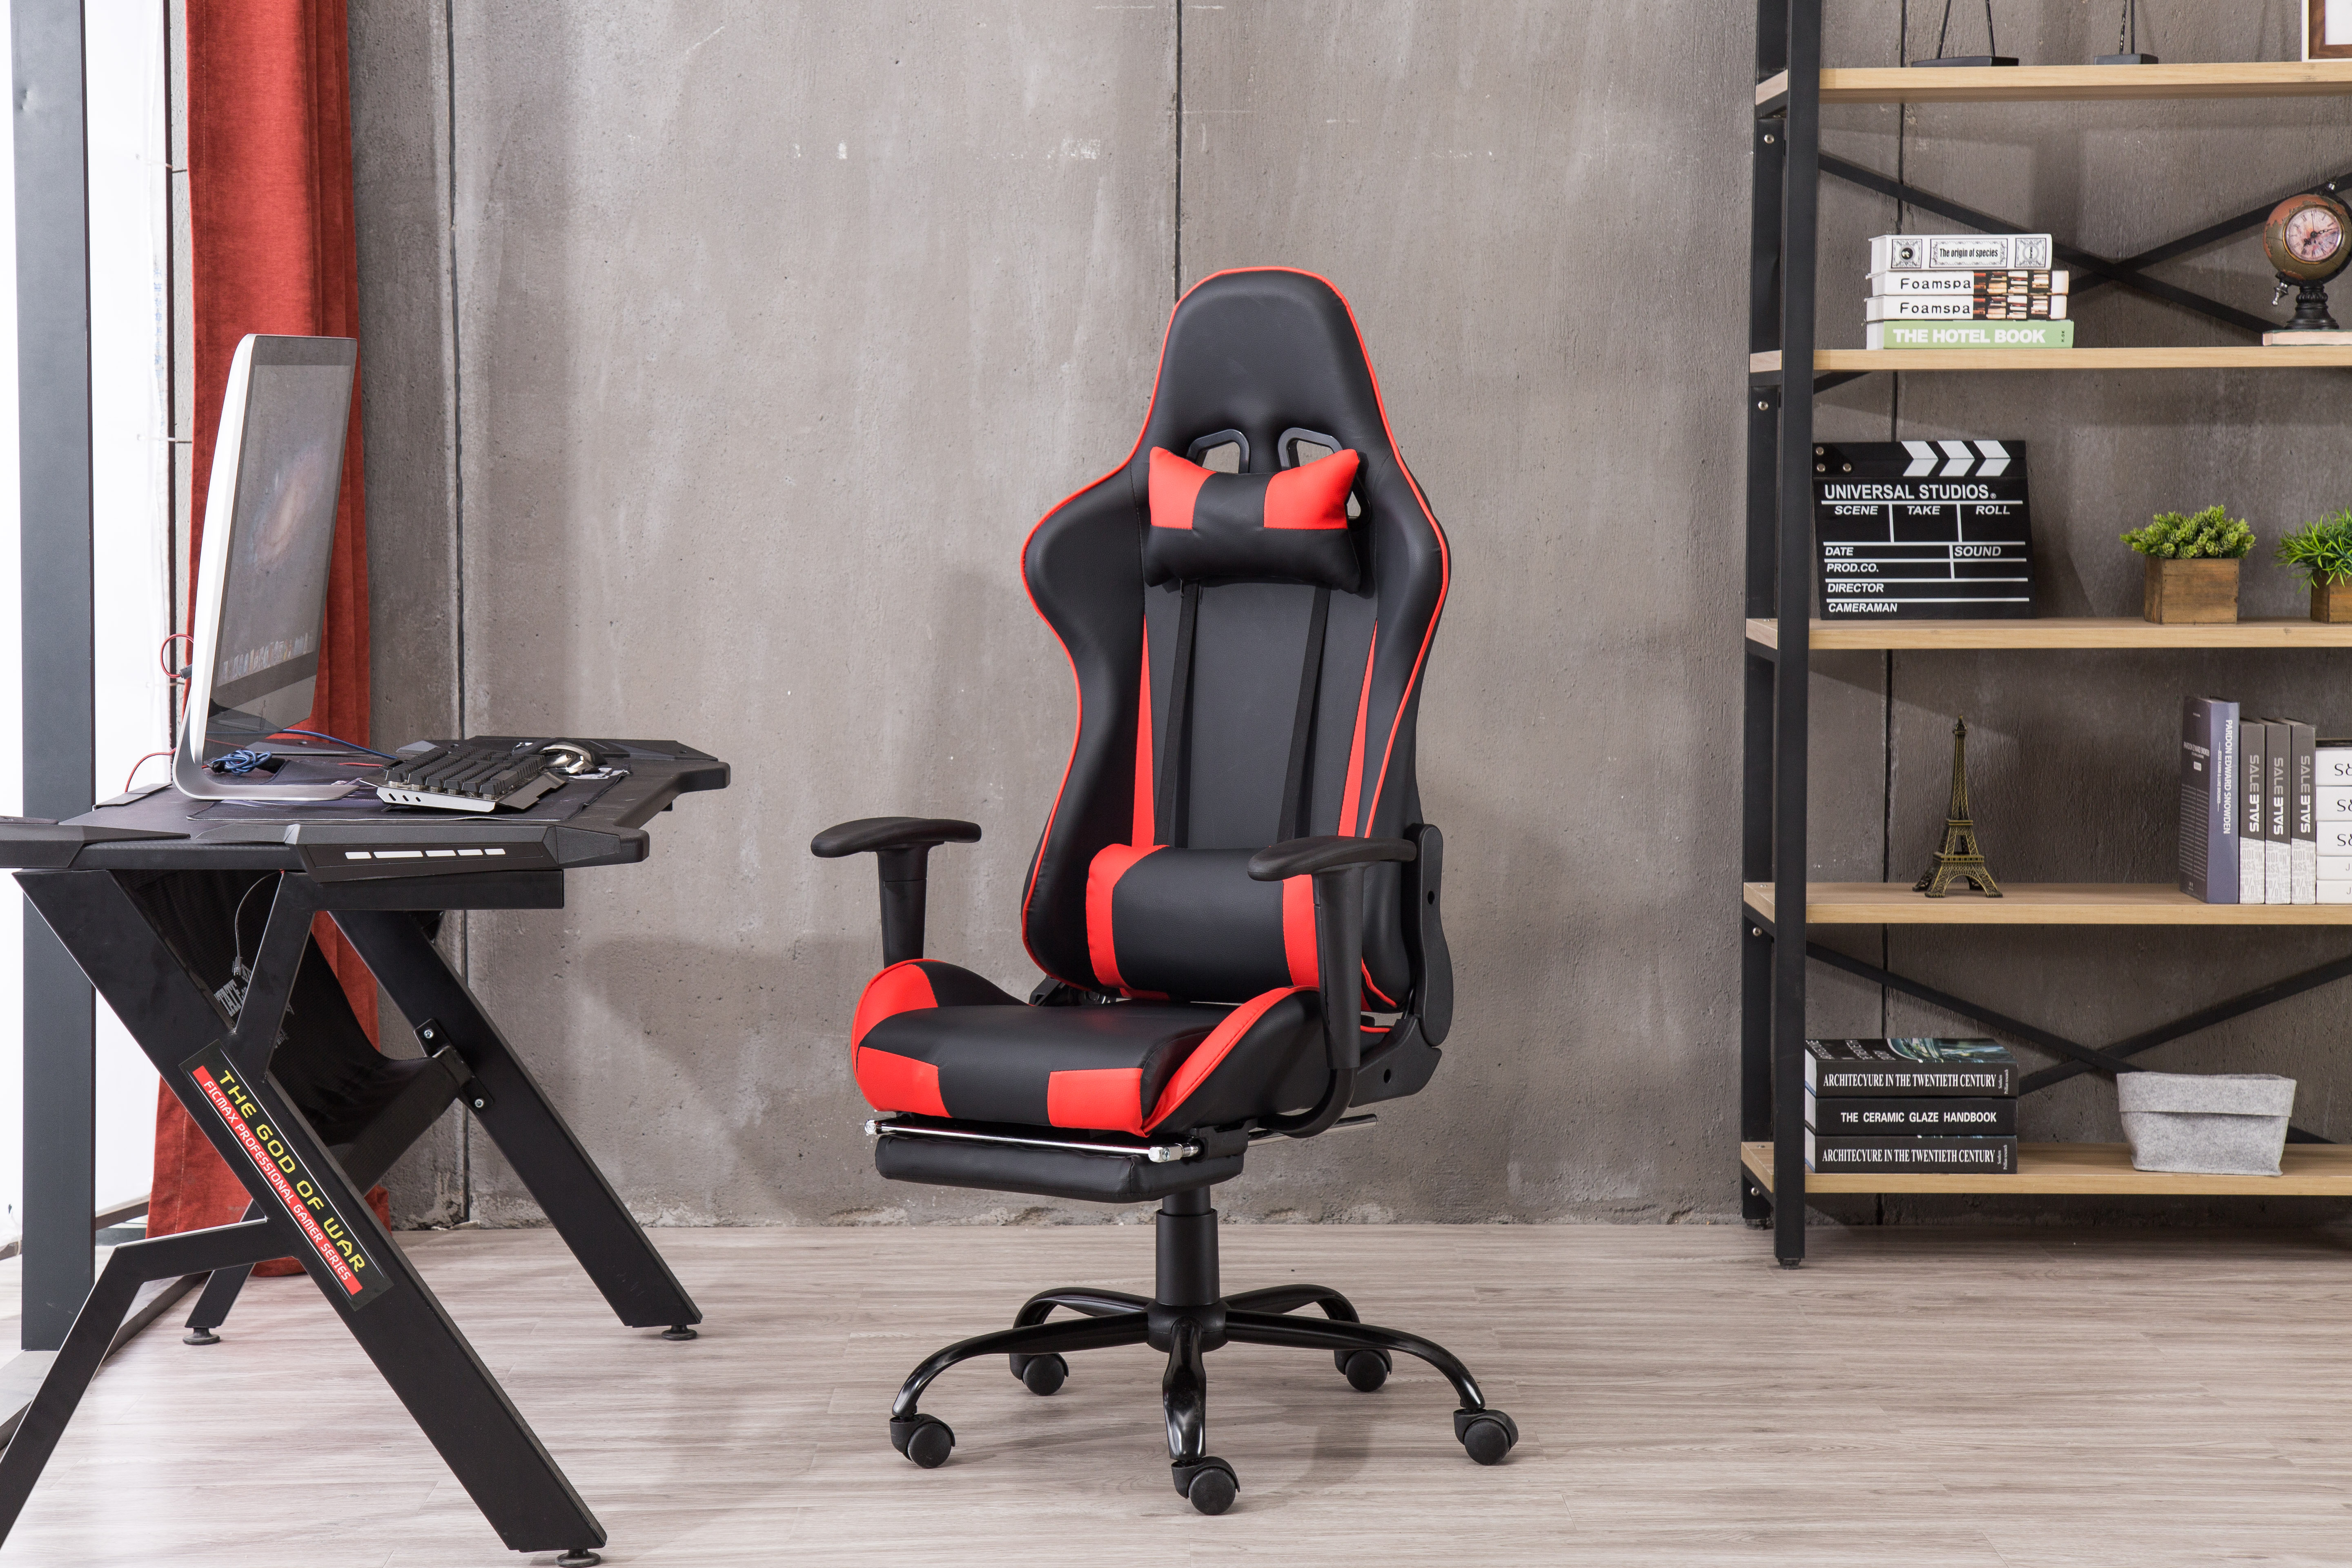 Ktaxon Gaming Chair Ergonomic High-Back Racing Chair Pu Leather Bucket Seat,Computer Swivel Office Chair Headrest and Lumbar Support - image 2 of 16